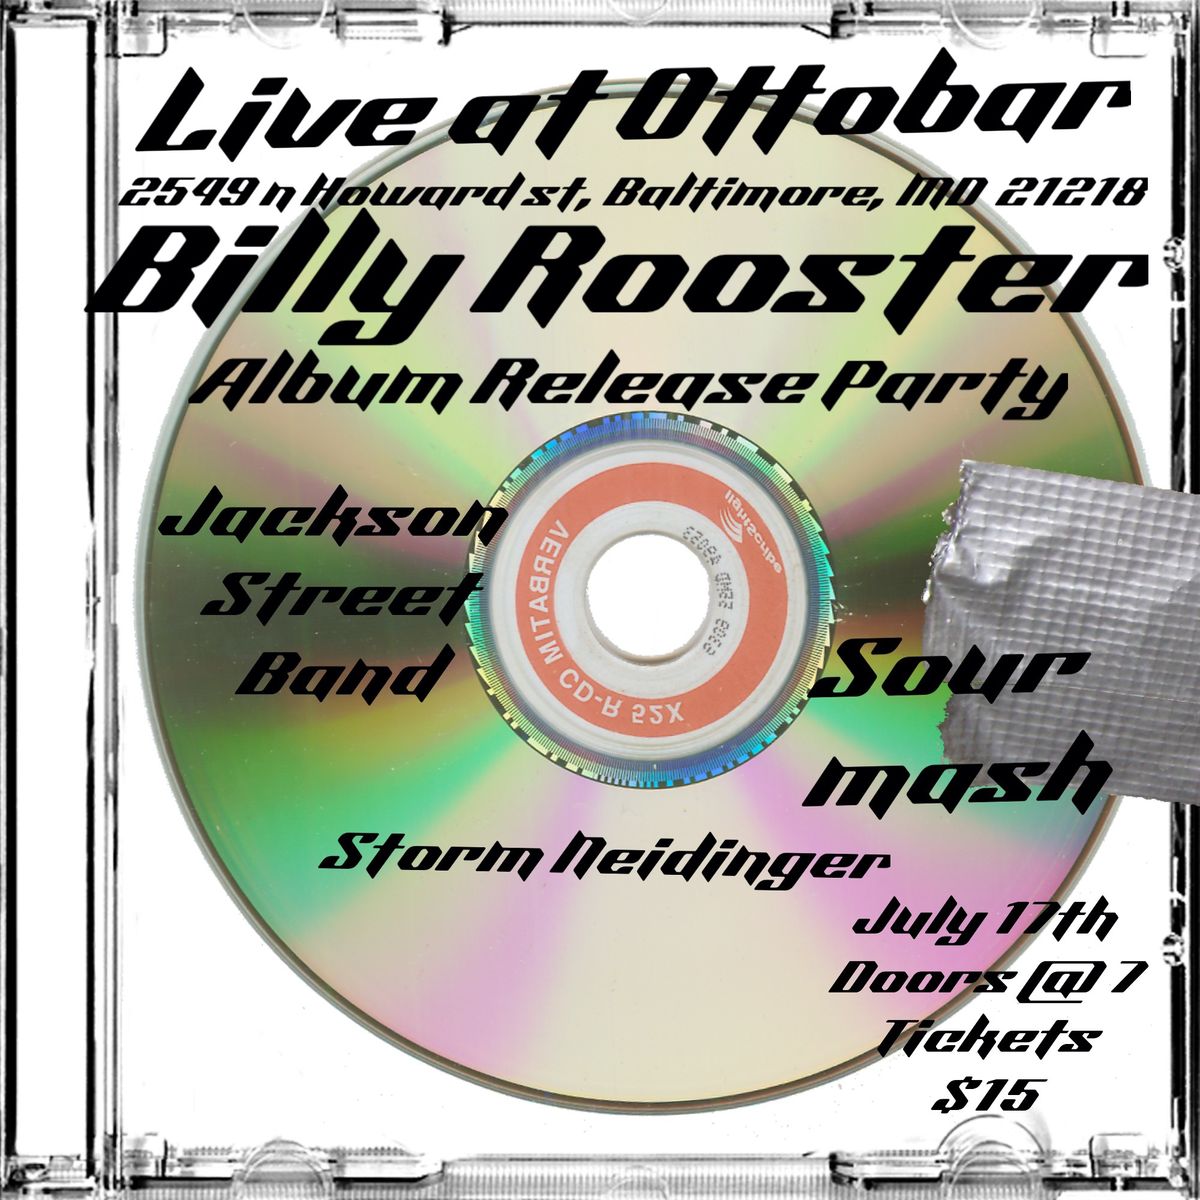 Billy Rooster album release